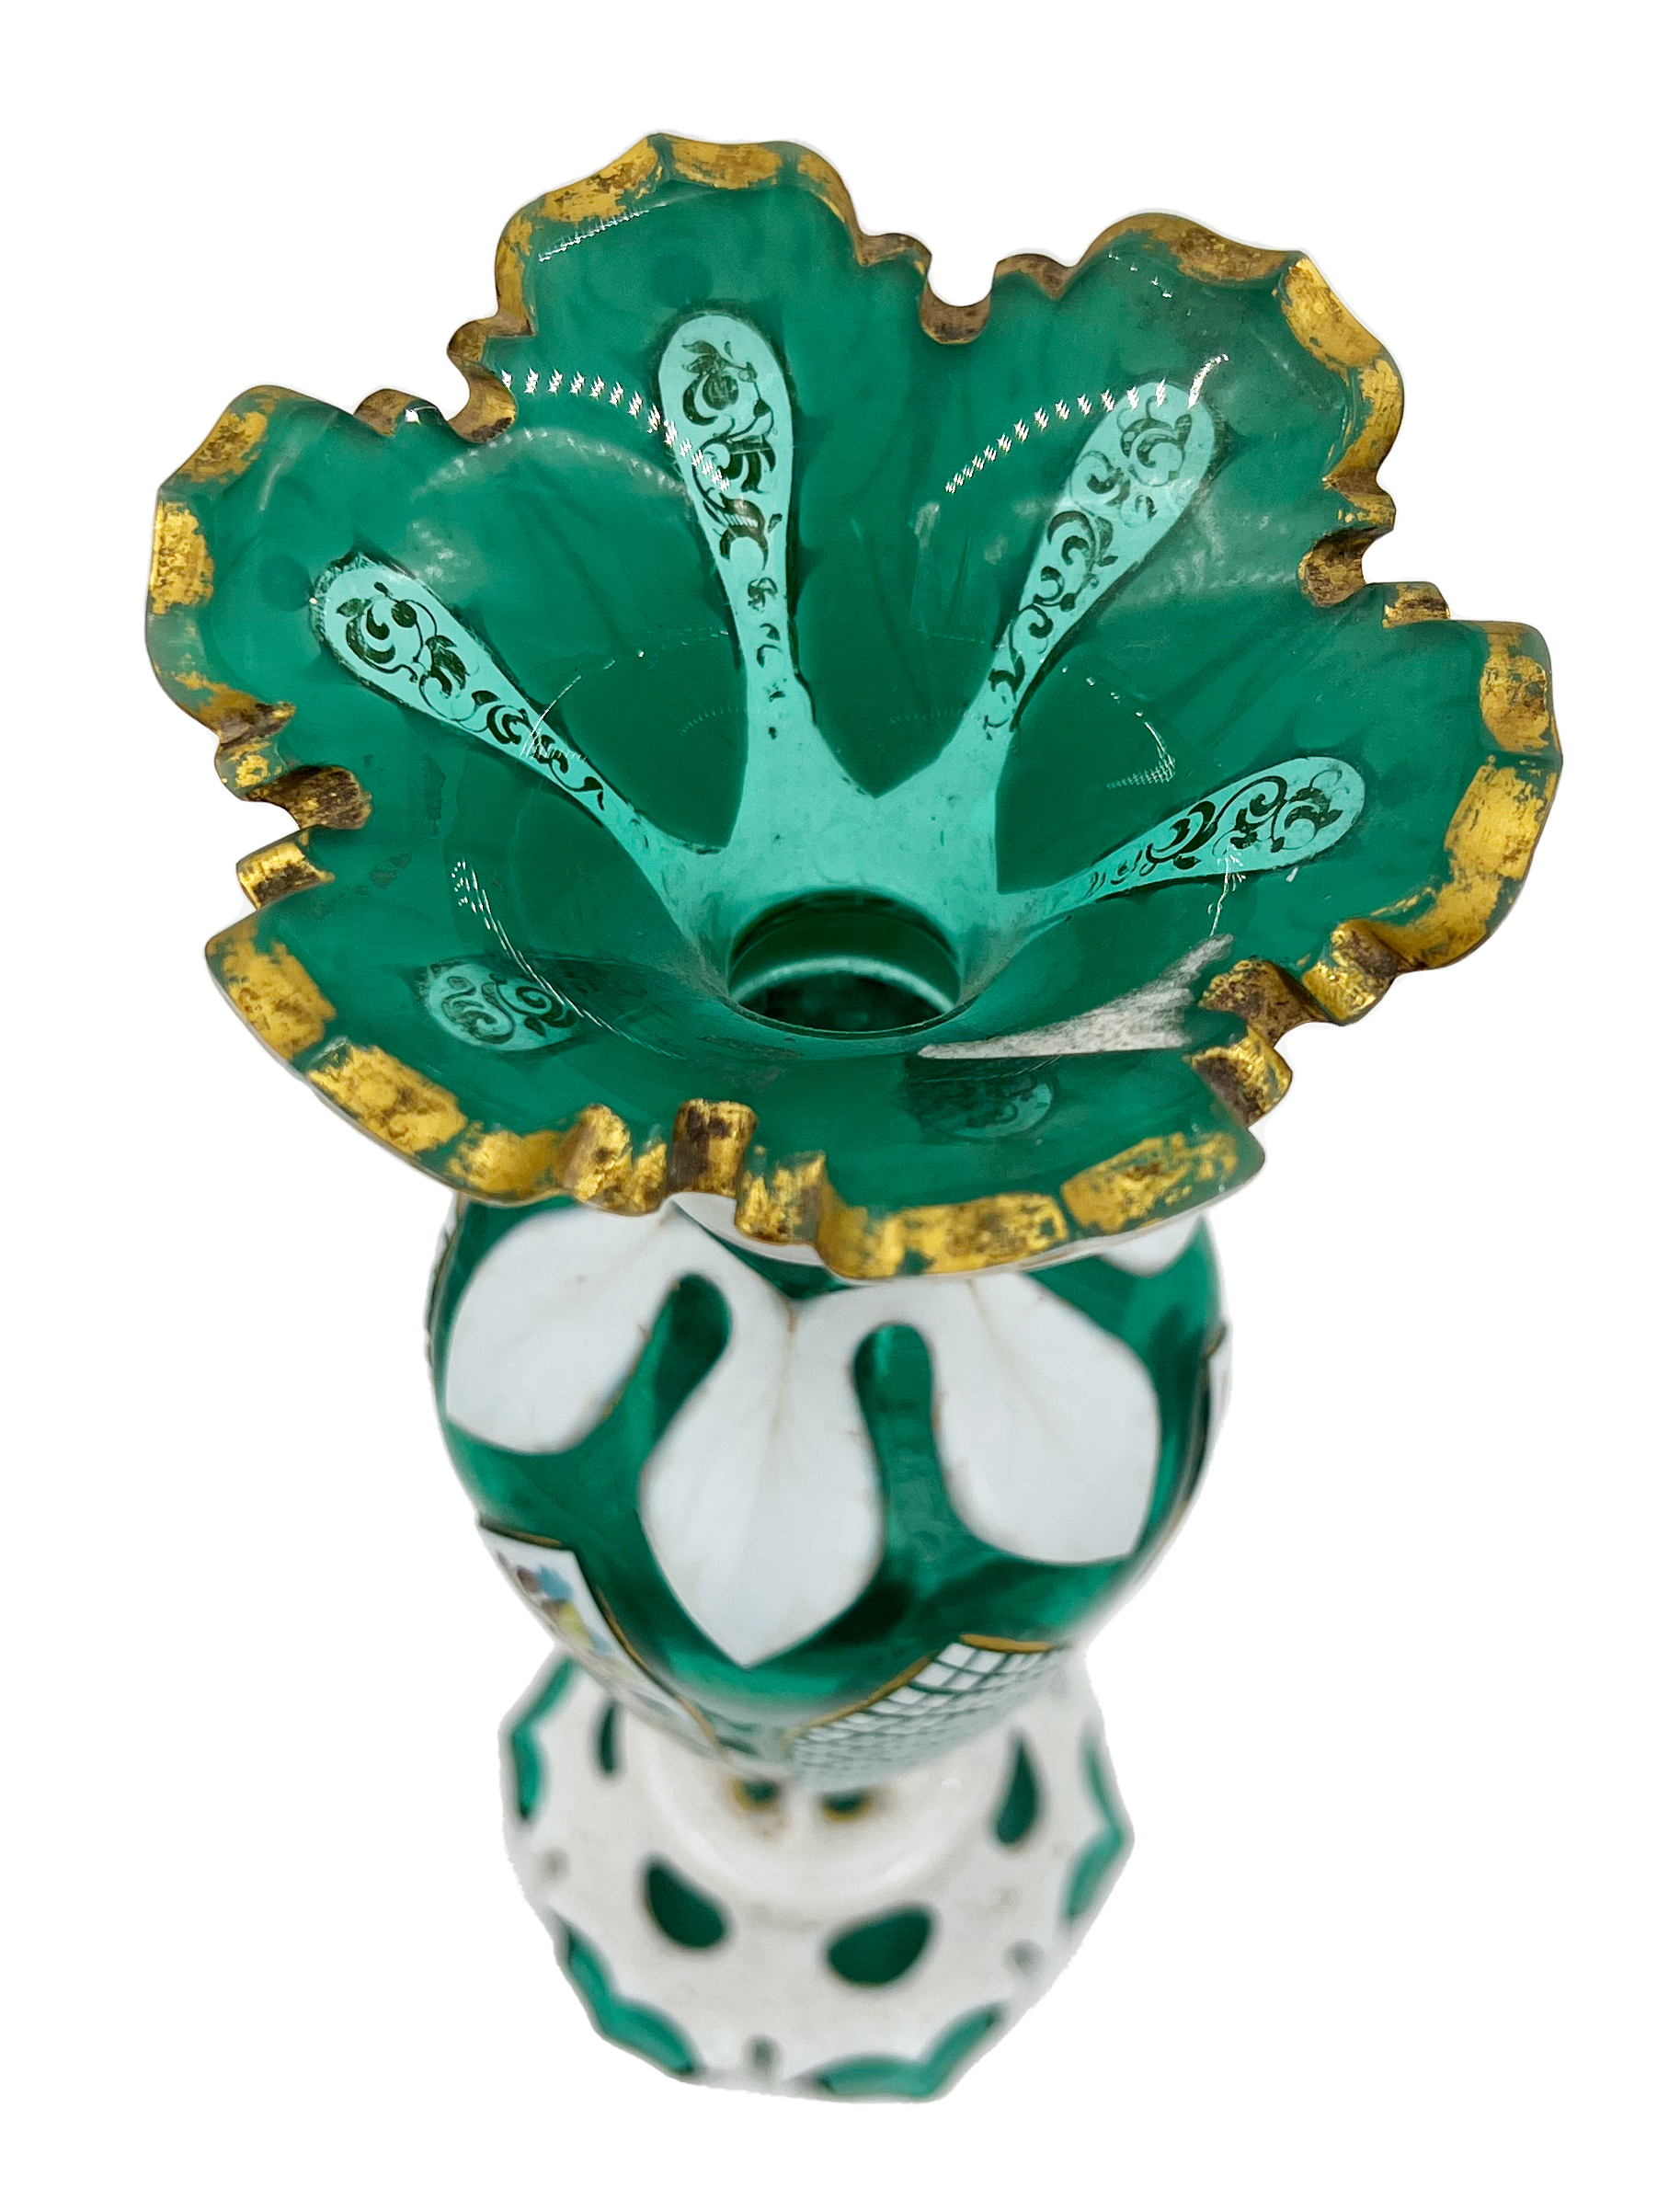 GREEN AND WHITE BOHEMIAN FLASHED GLASS VASE, 19TH CENTURY - Image 3 of 7